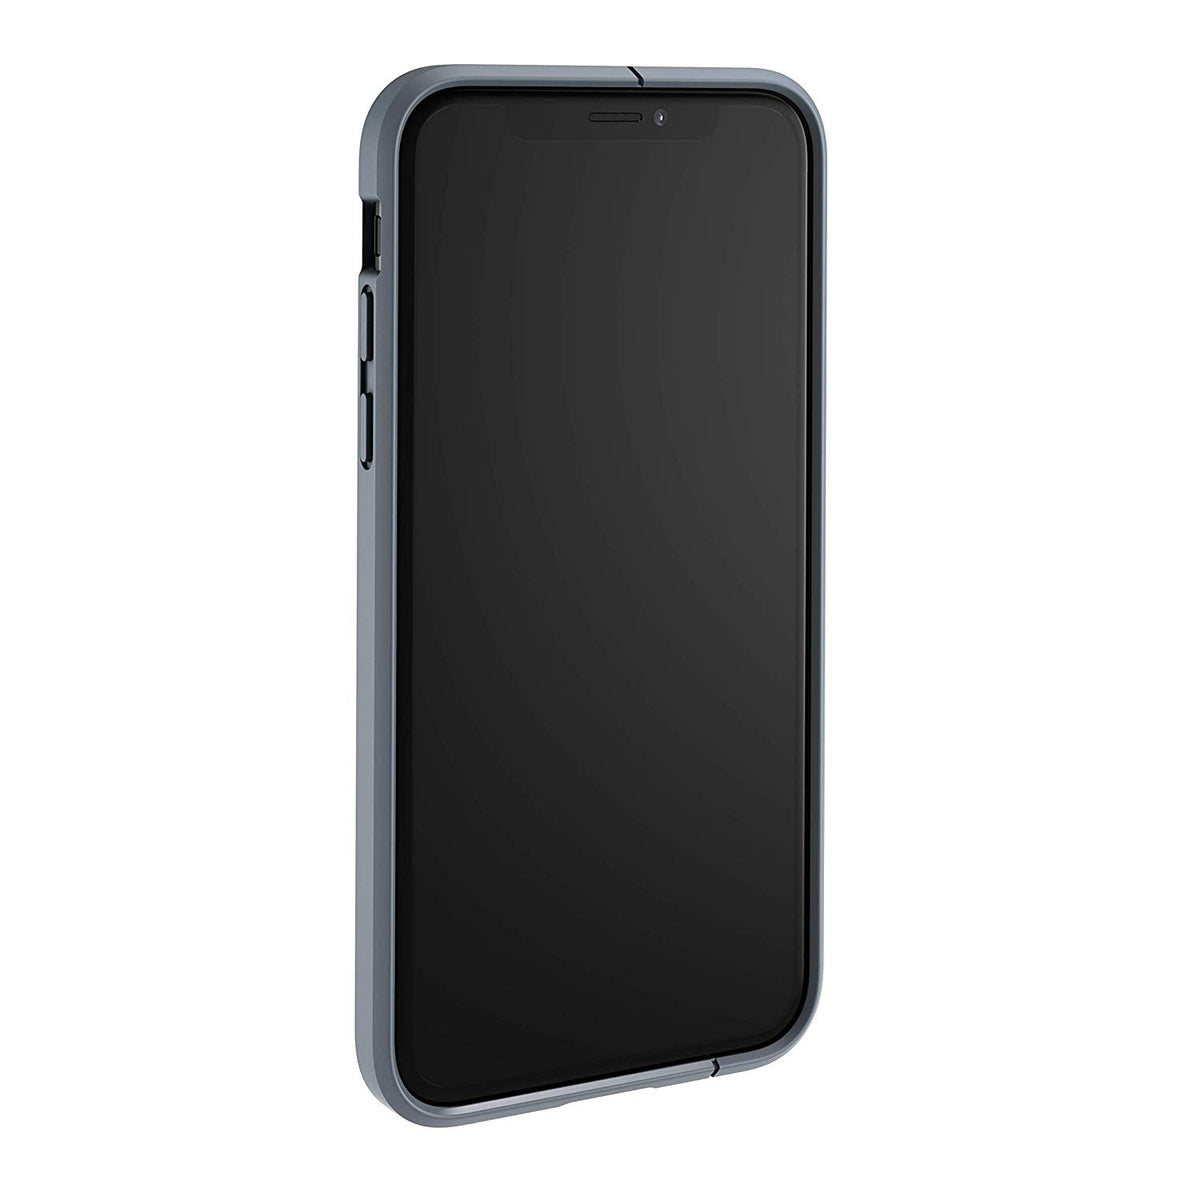 [OPEN BOX] ELEMENT CASE Illusion For iPhone XS Max - Gray